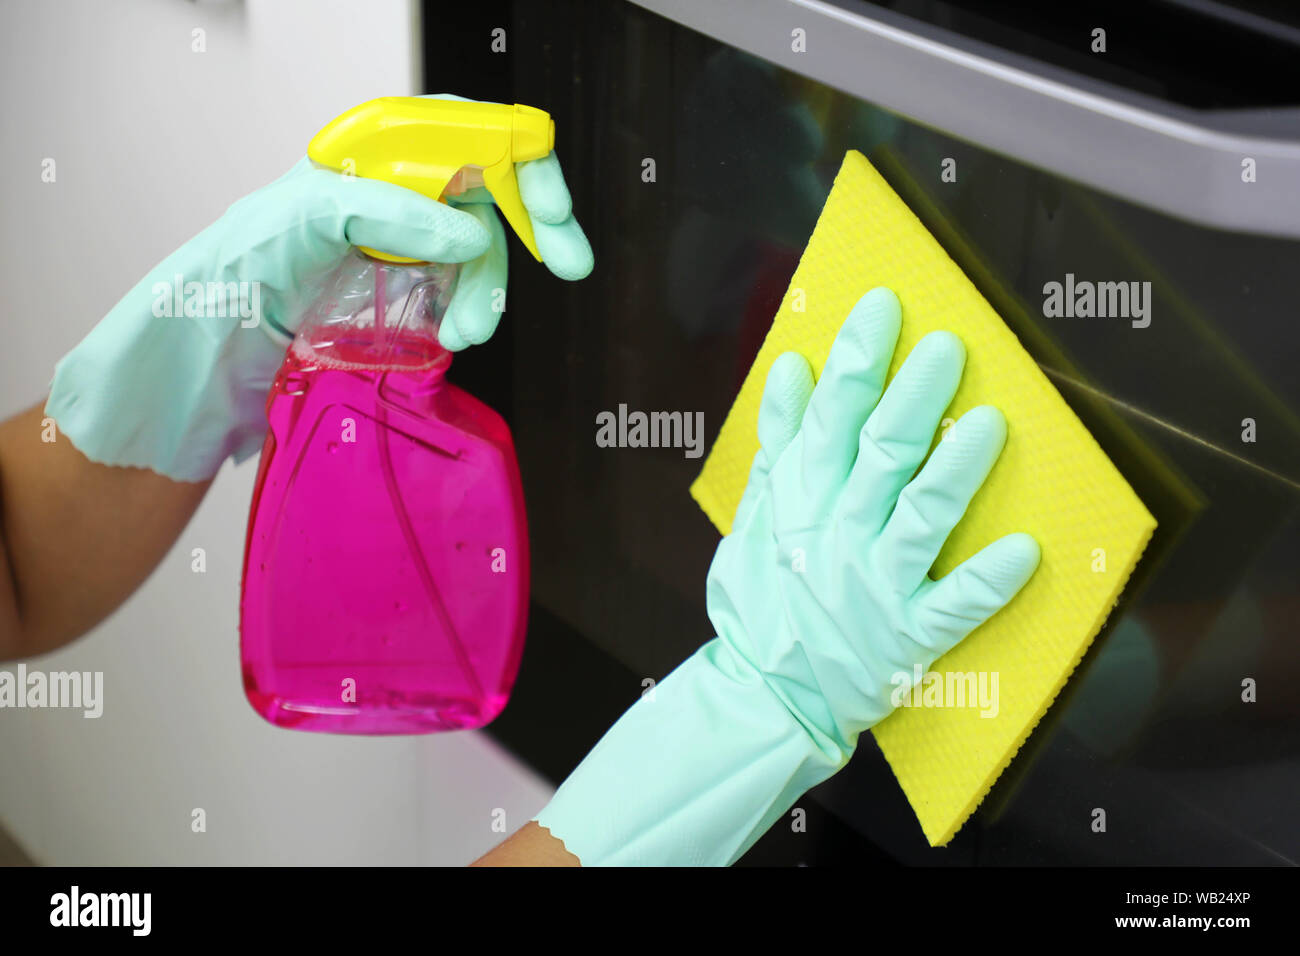 Close up of female hands with protective gloves cleaning oven door. Girl polishing kitchen. People, housework, cleaning concept. Stock Photo